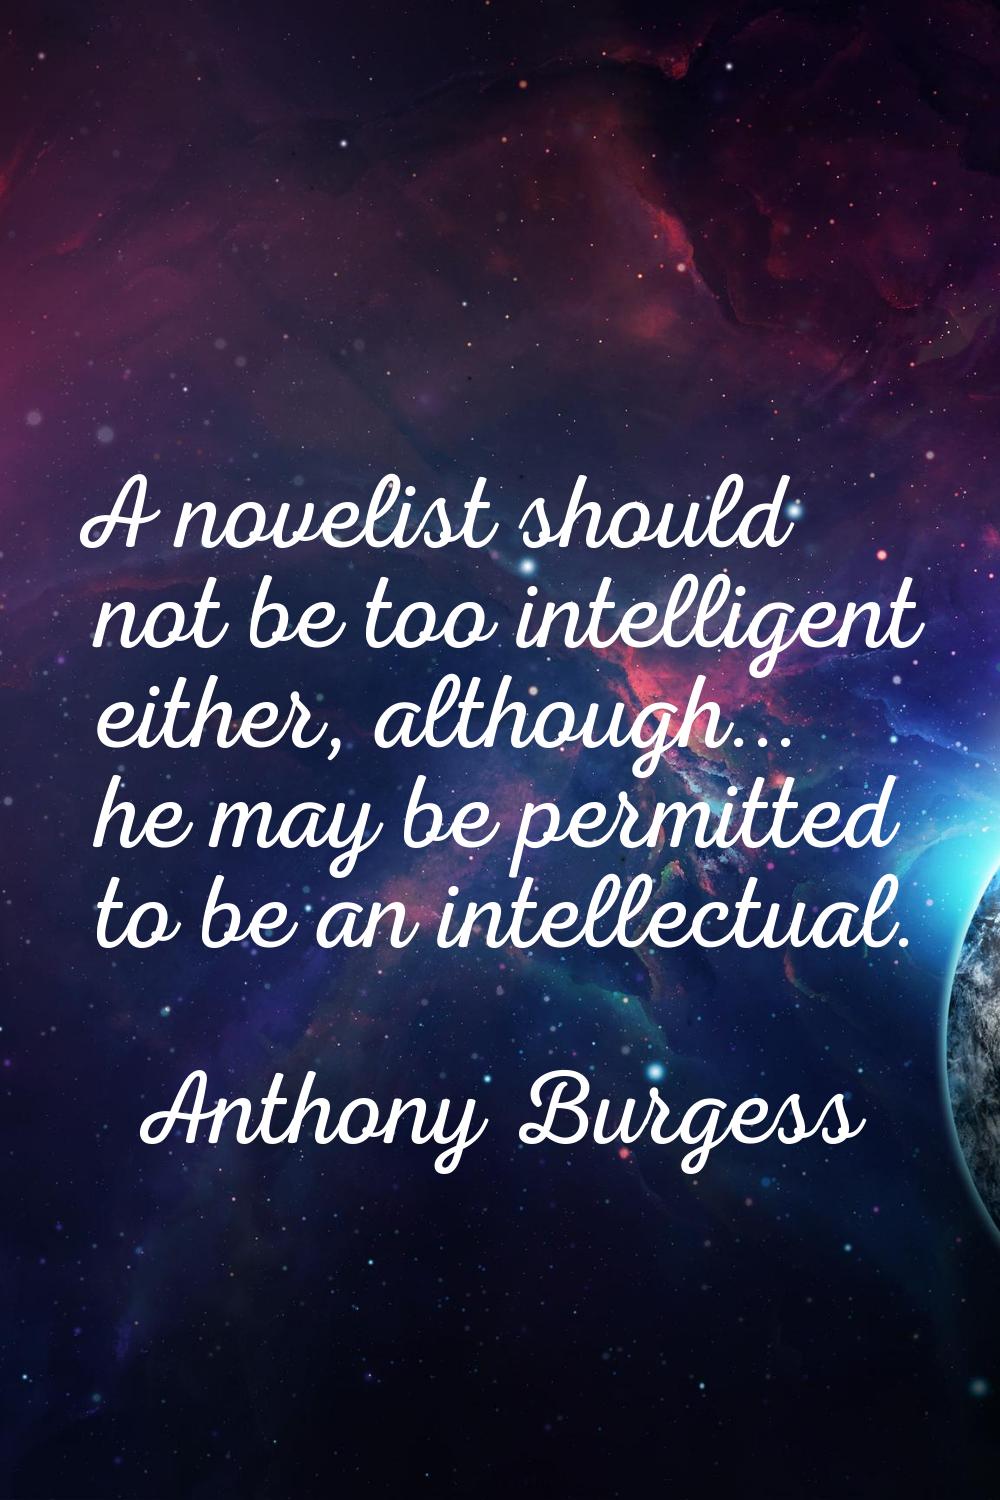 A novelist should not be too intelligent either, although... he may be permitted to be an intellect